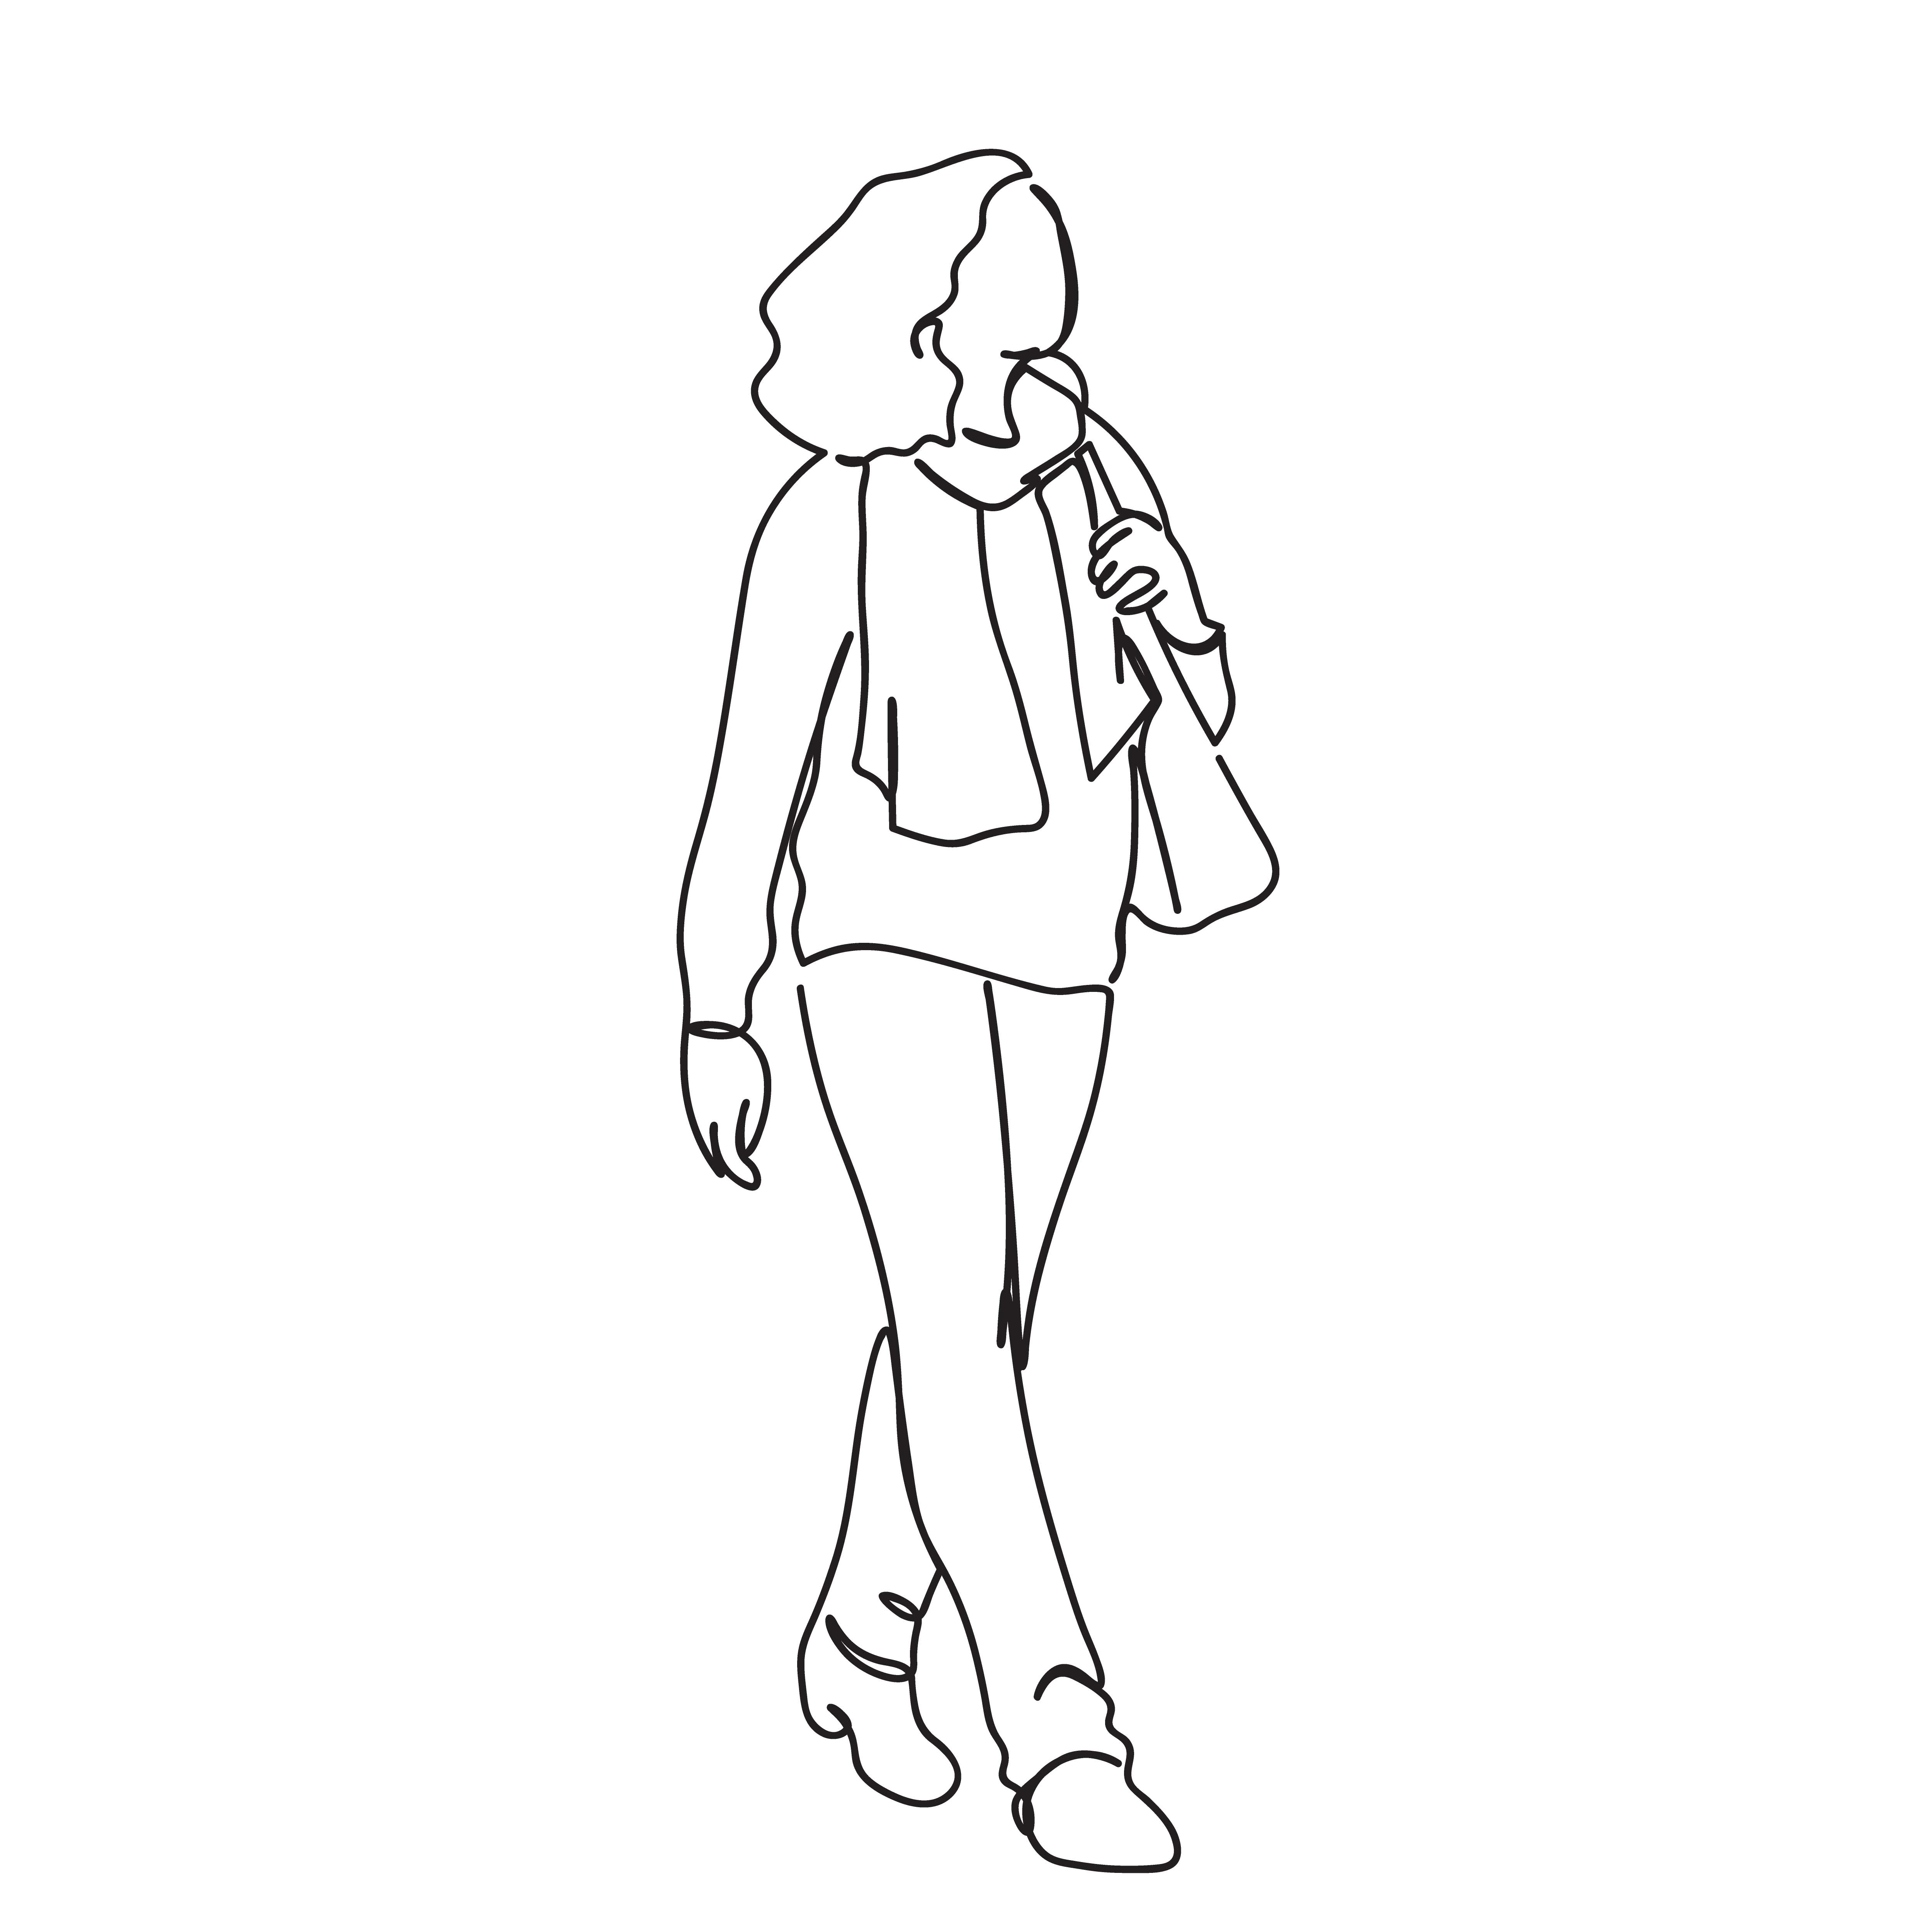 Girl walking Single Line Art Drawing For Personal Or Commercial Use cover image.